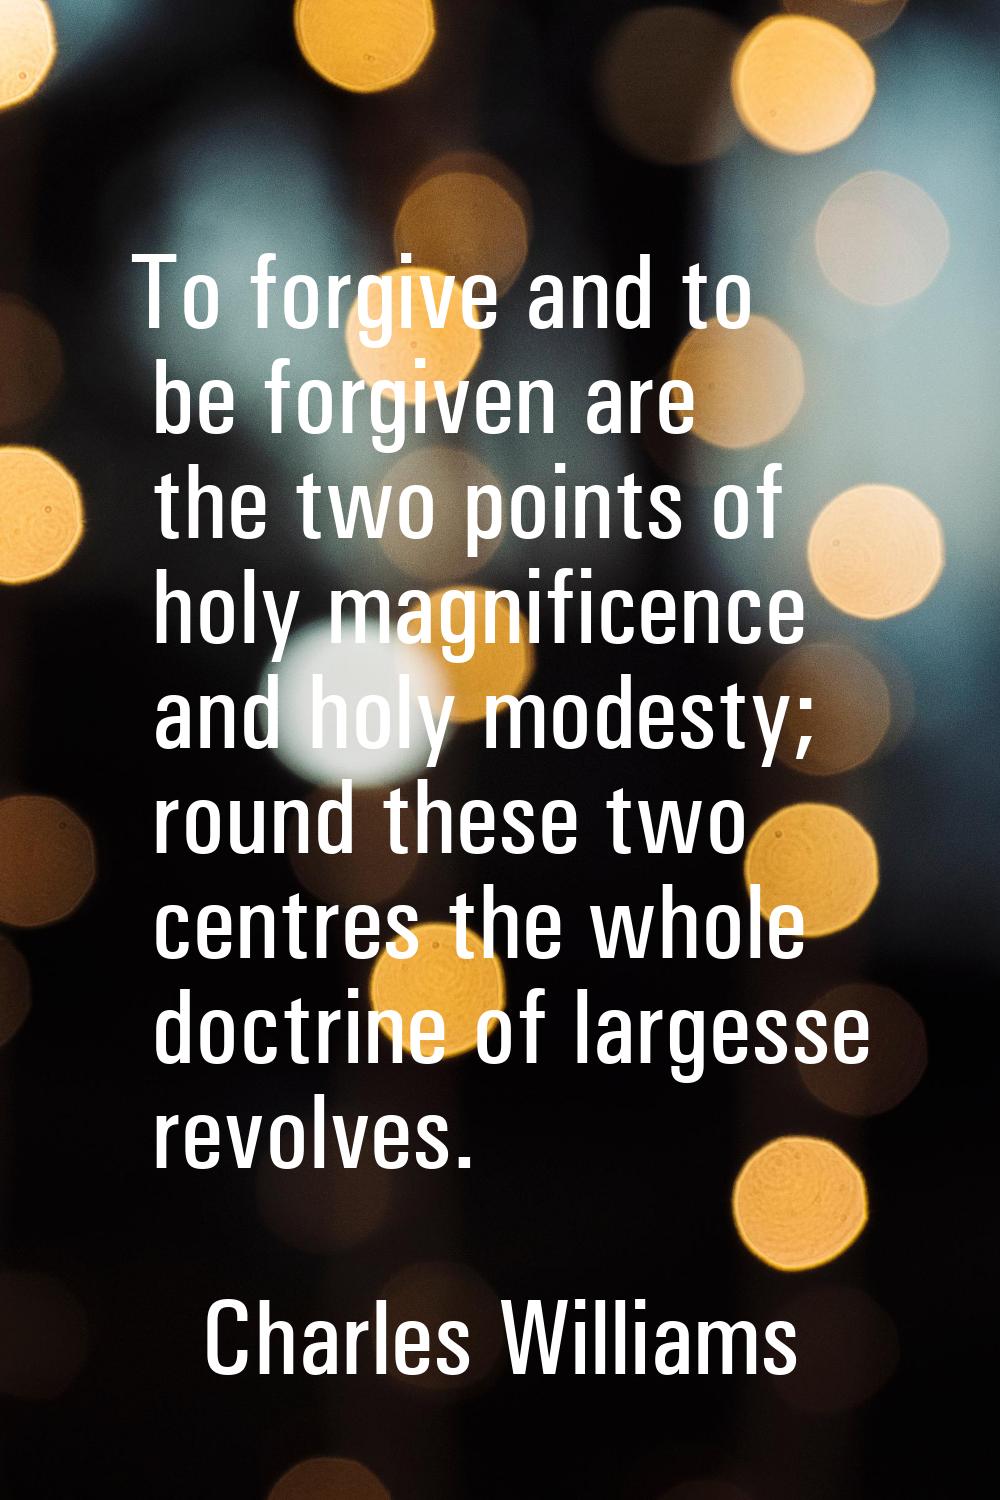 To forgive and to be forgiven are the two points of holy magnificence and holy modesty; round these